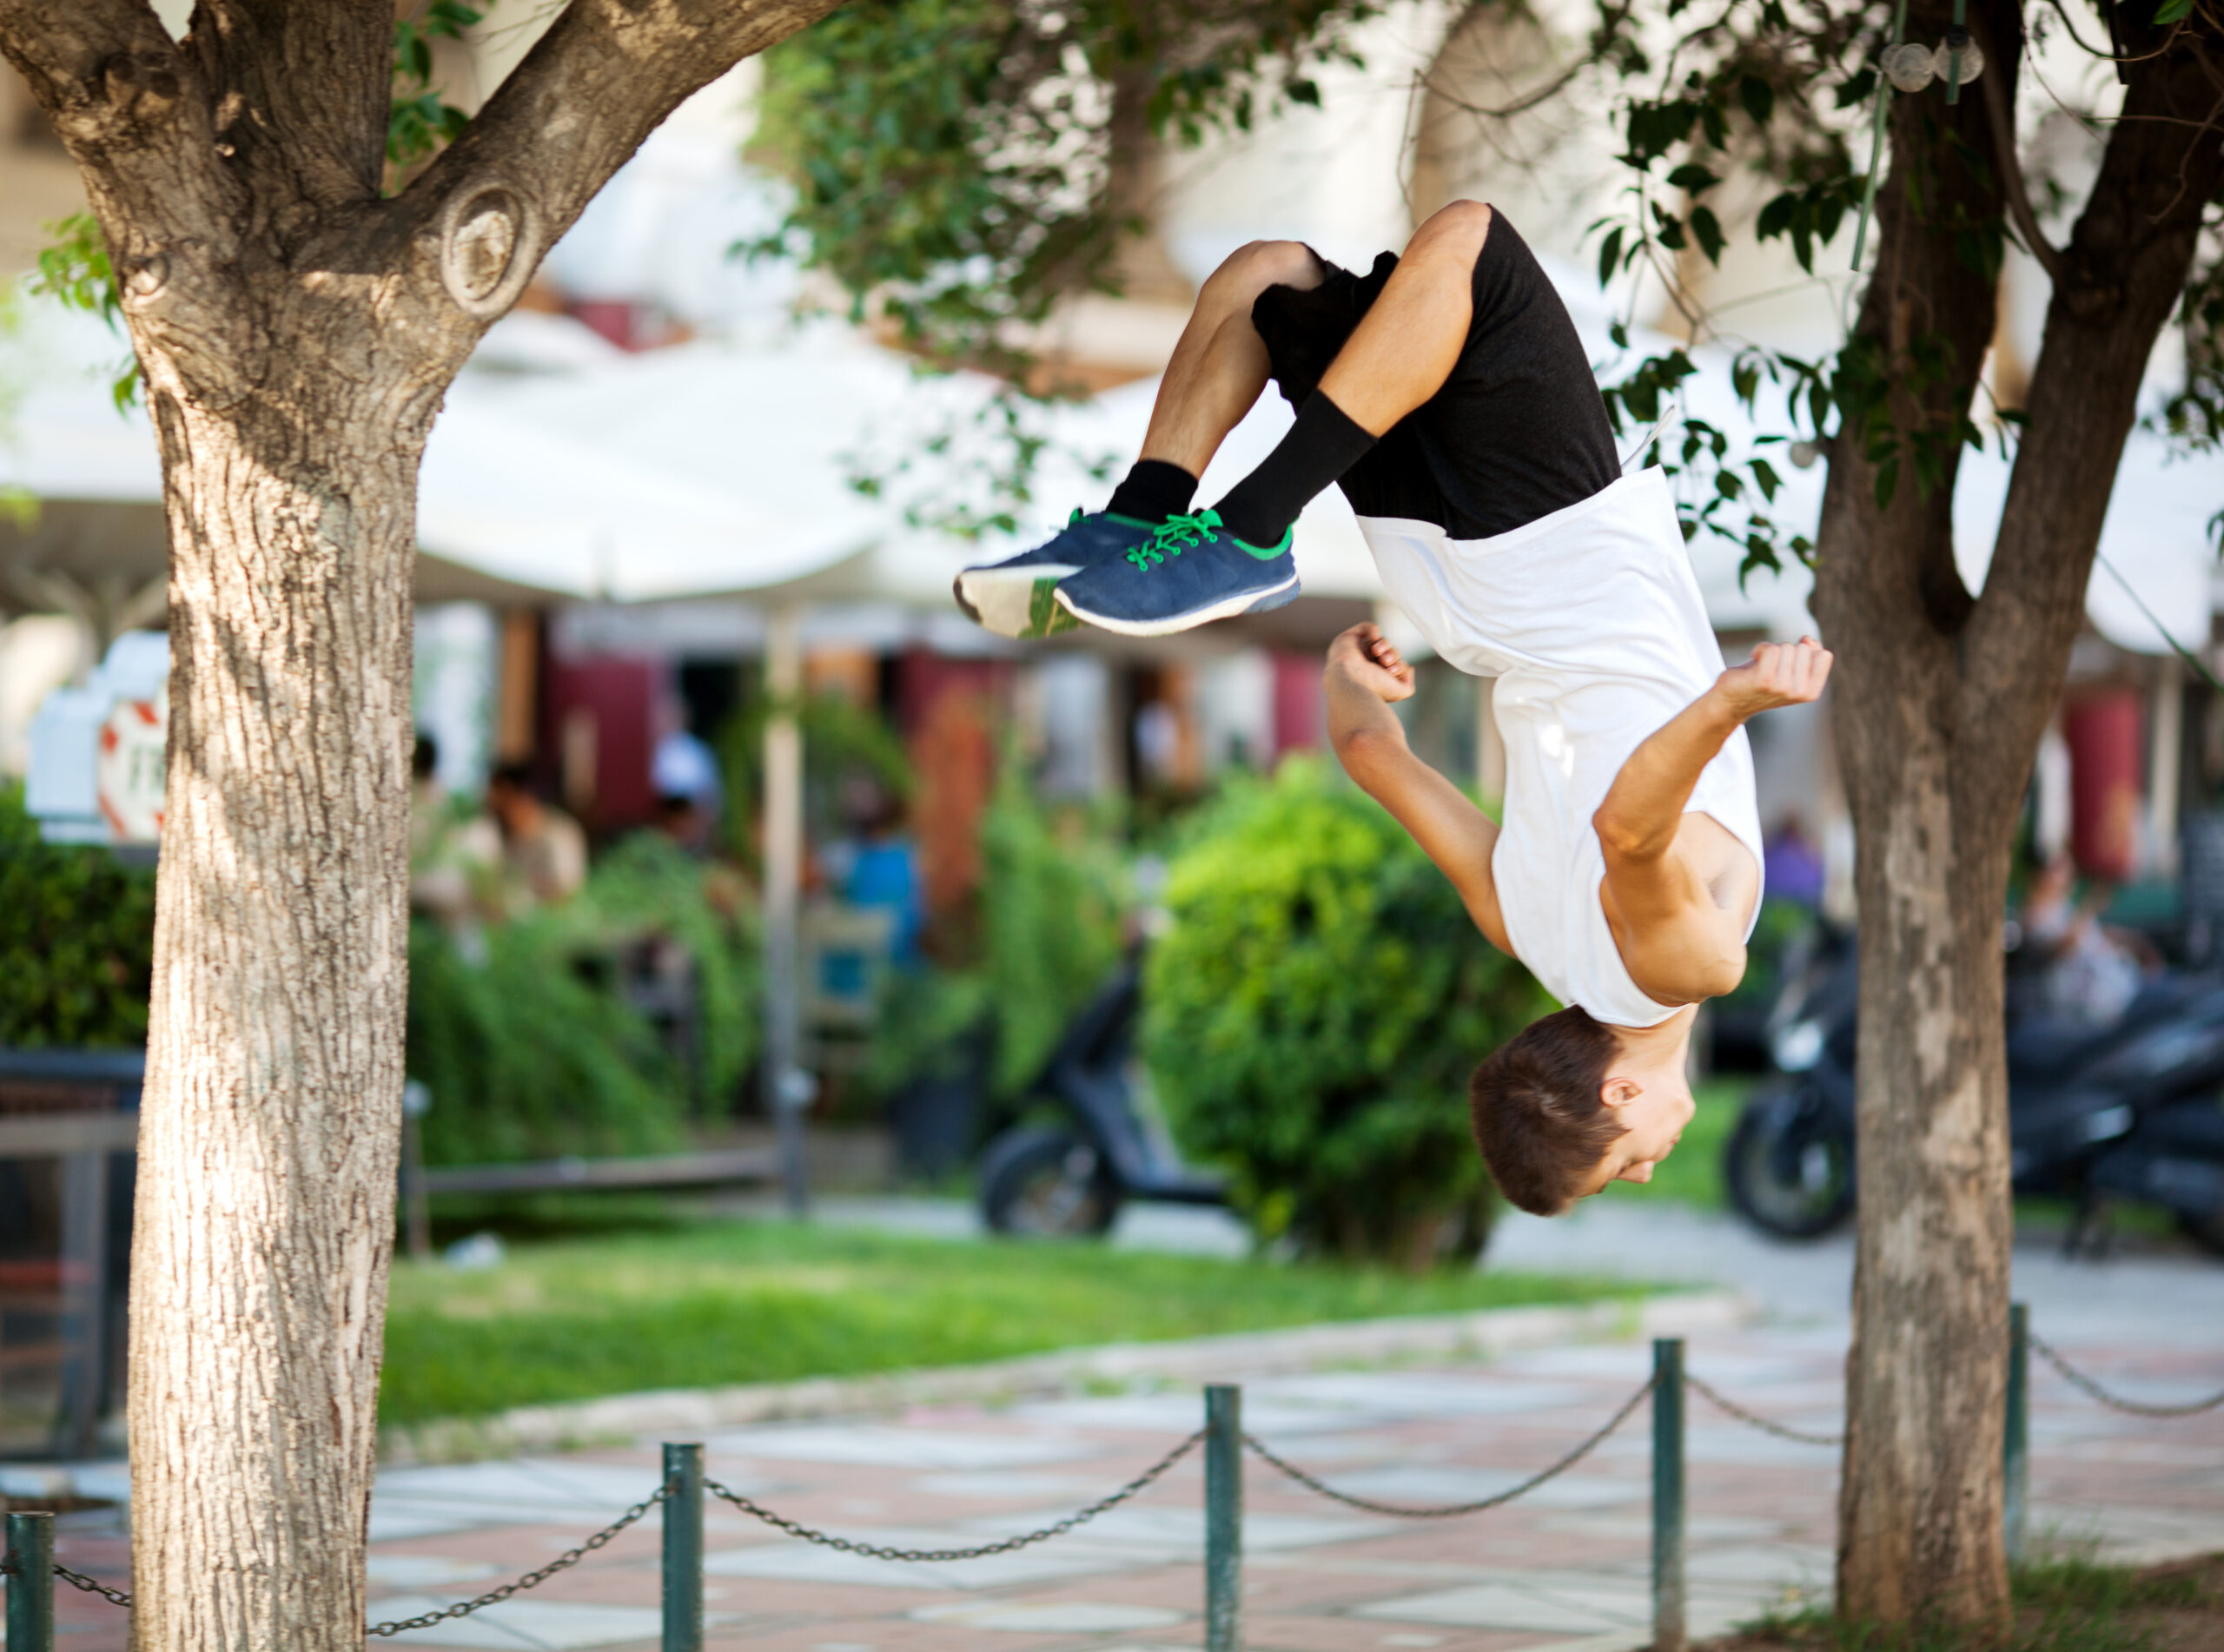 A young man wearing a white t shirt and black shorts and blue sneakers foes a front flip against an urban park background.